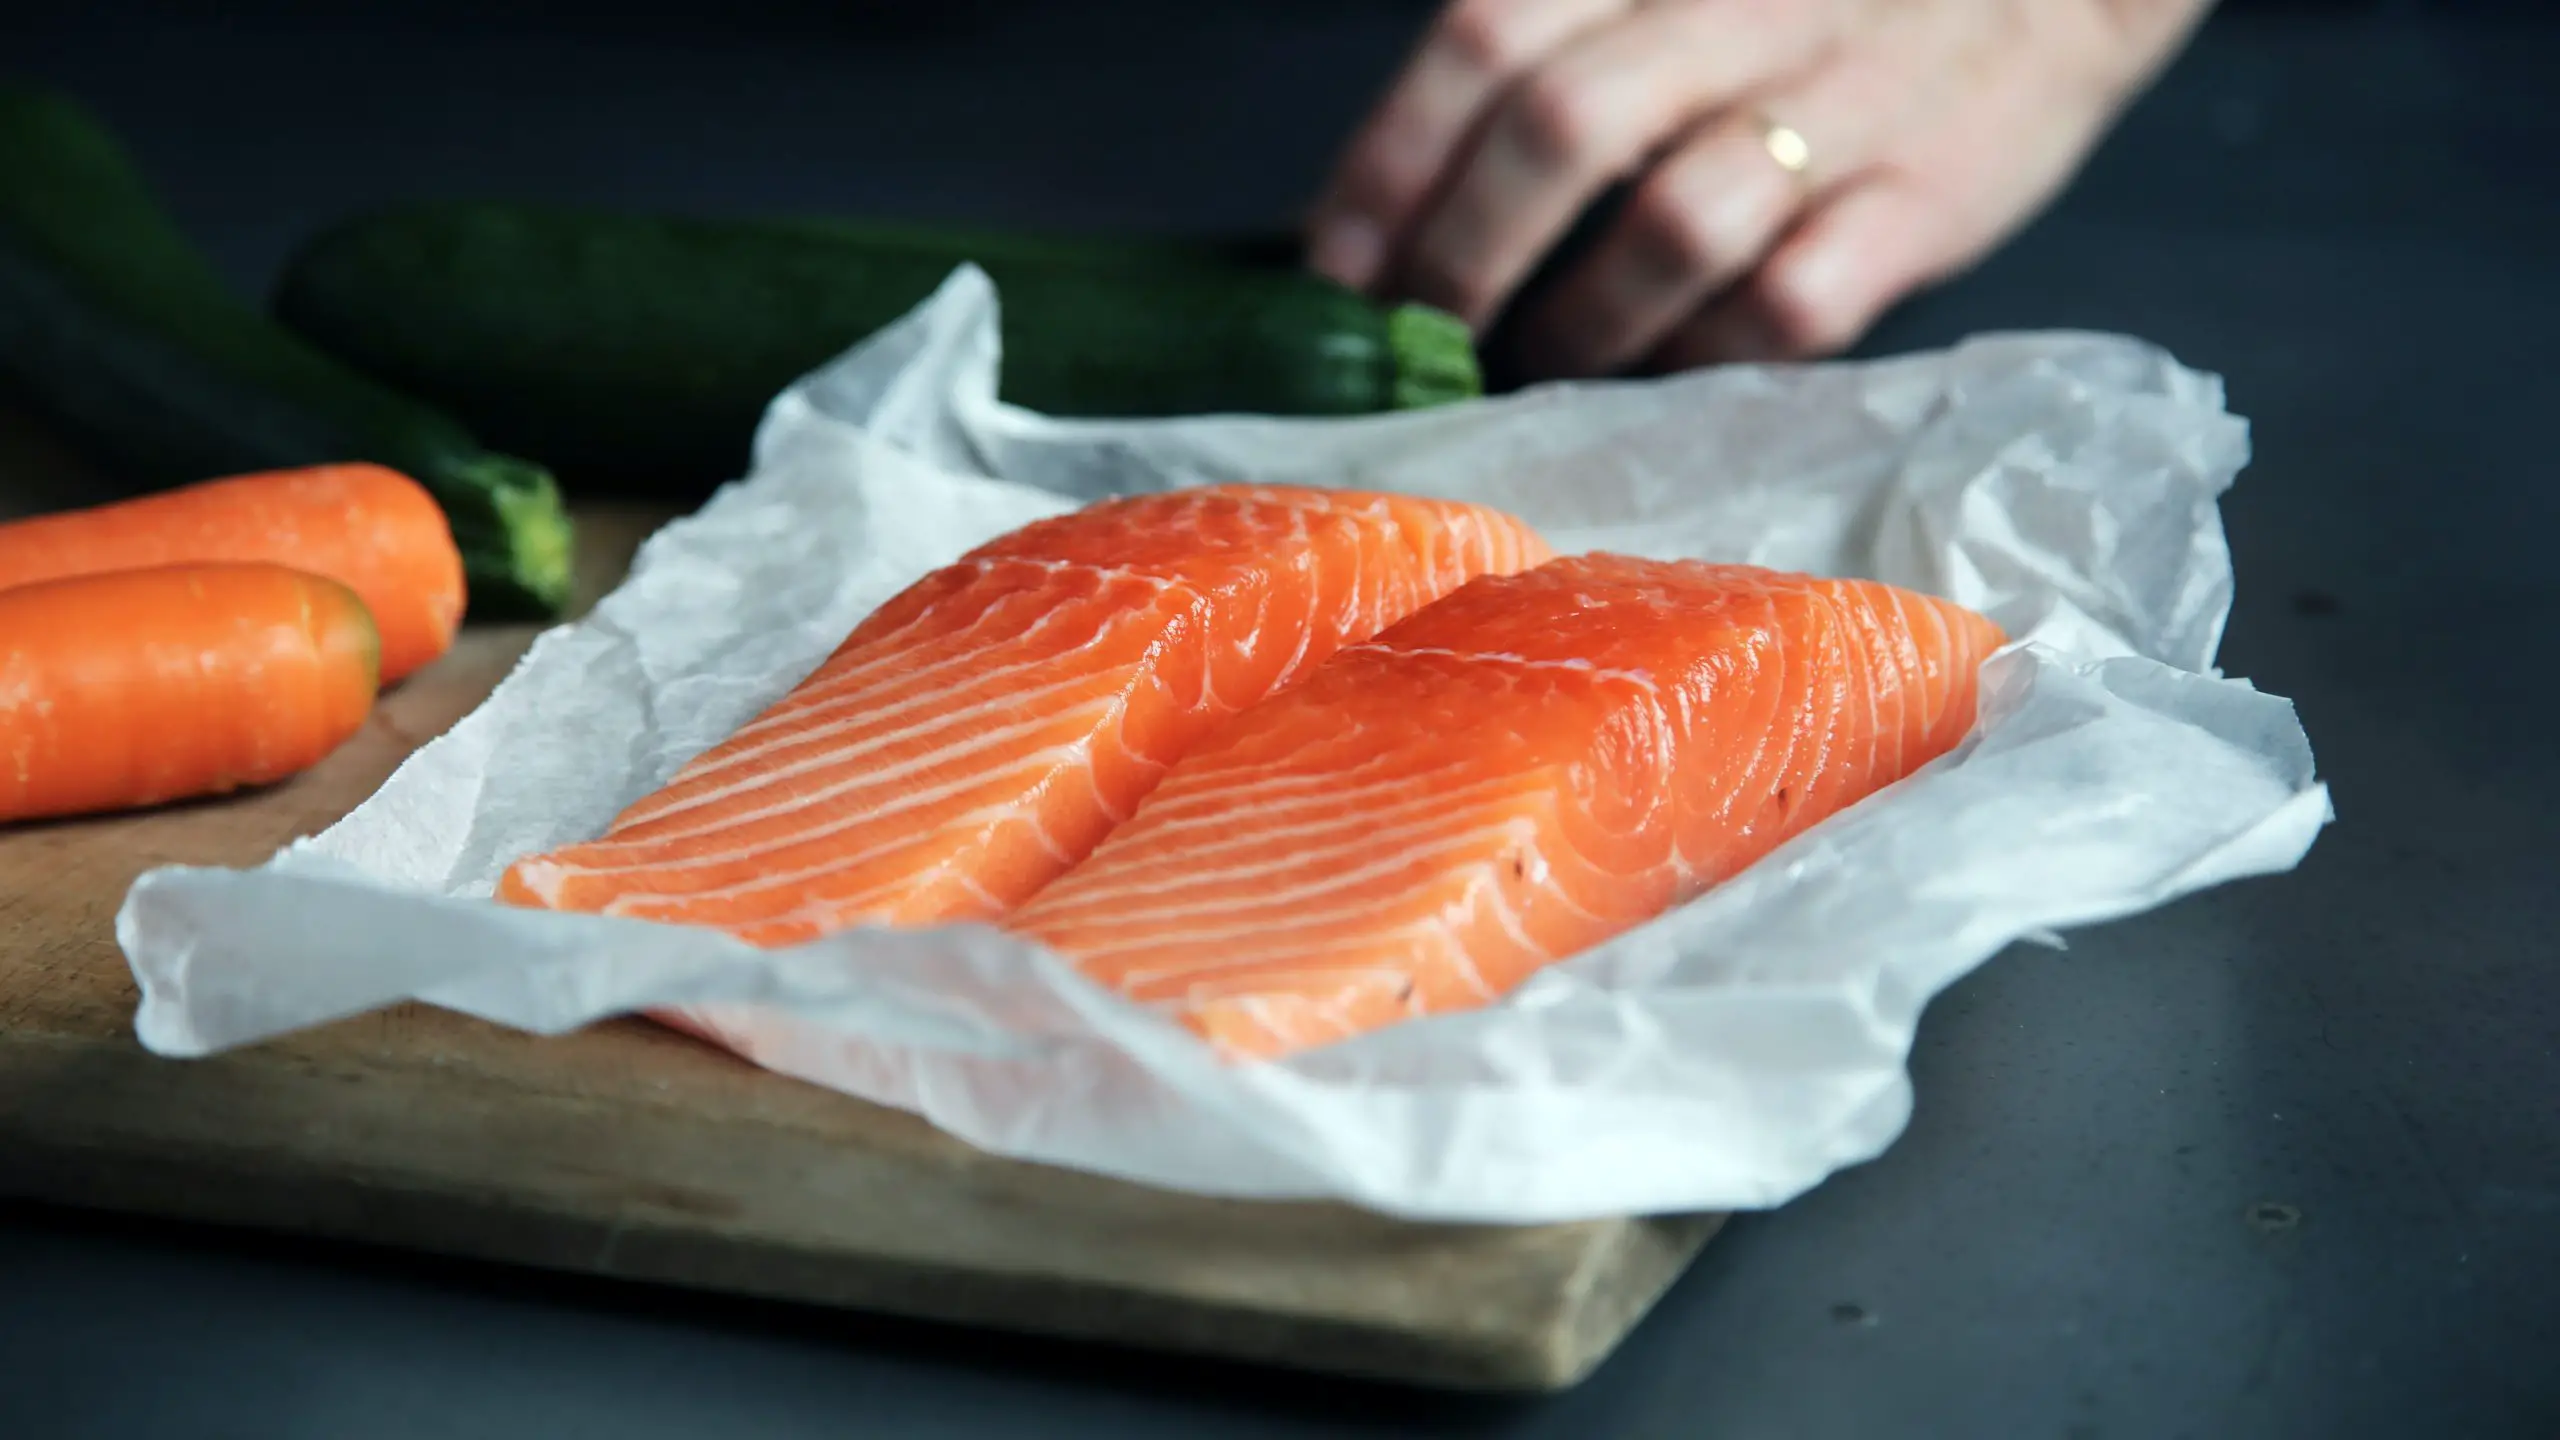 Where Should You Store Raw Fish in a Refrigerator